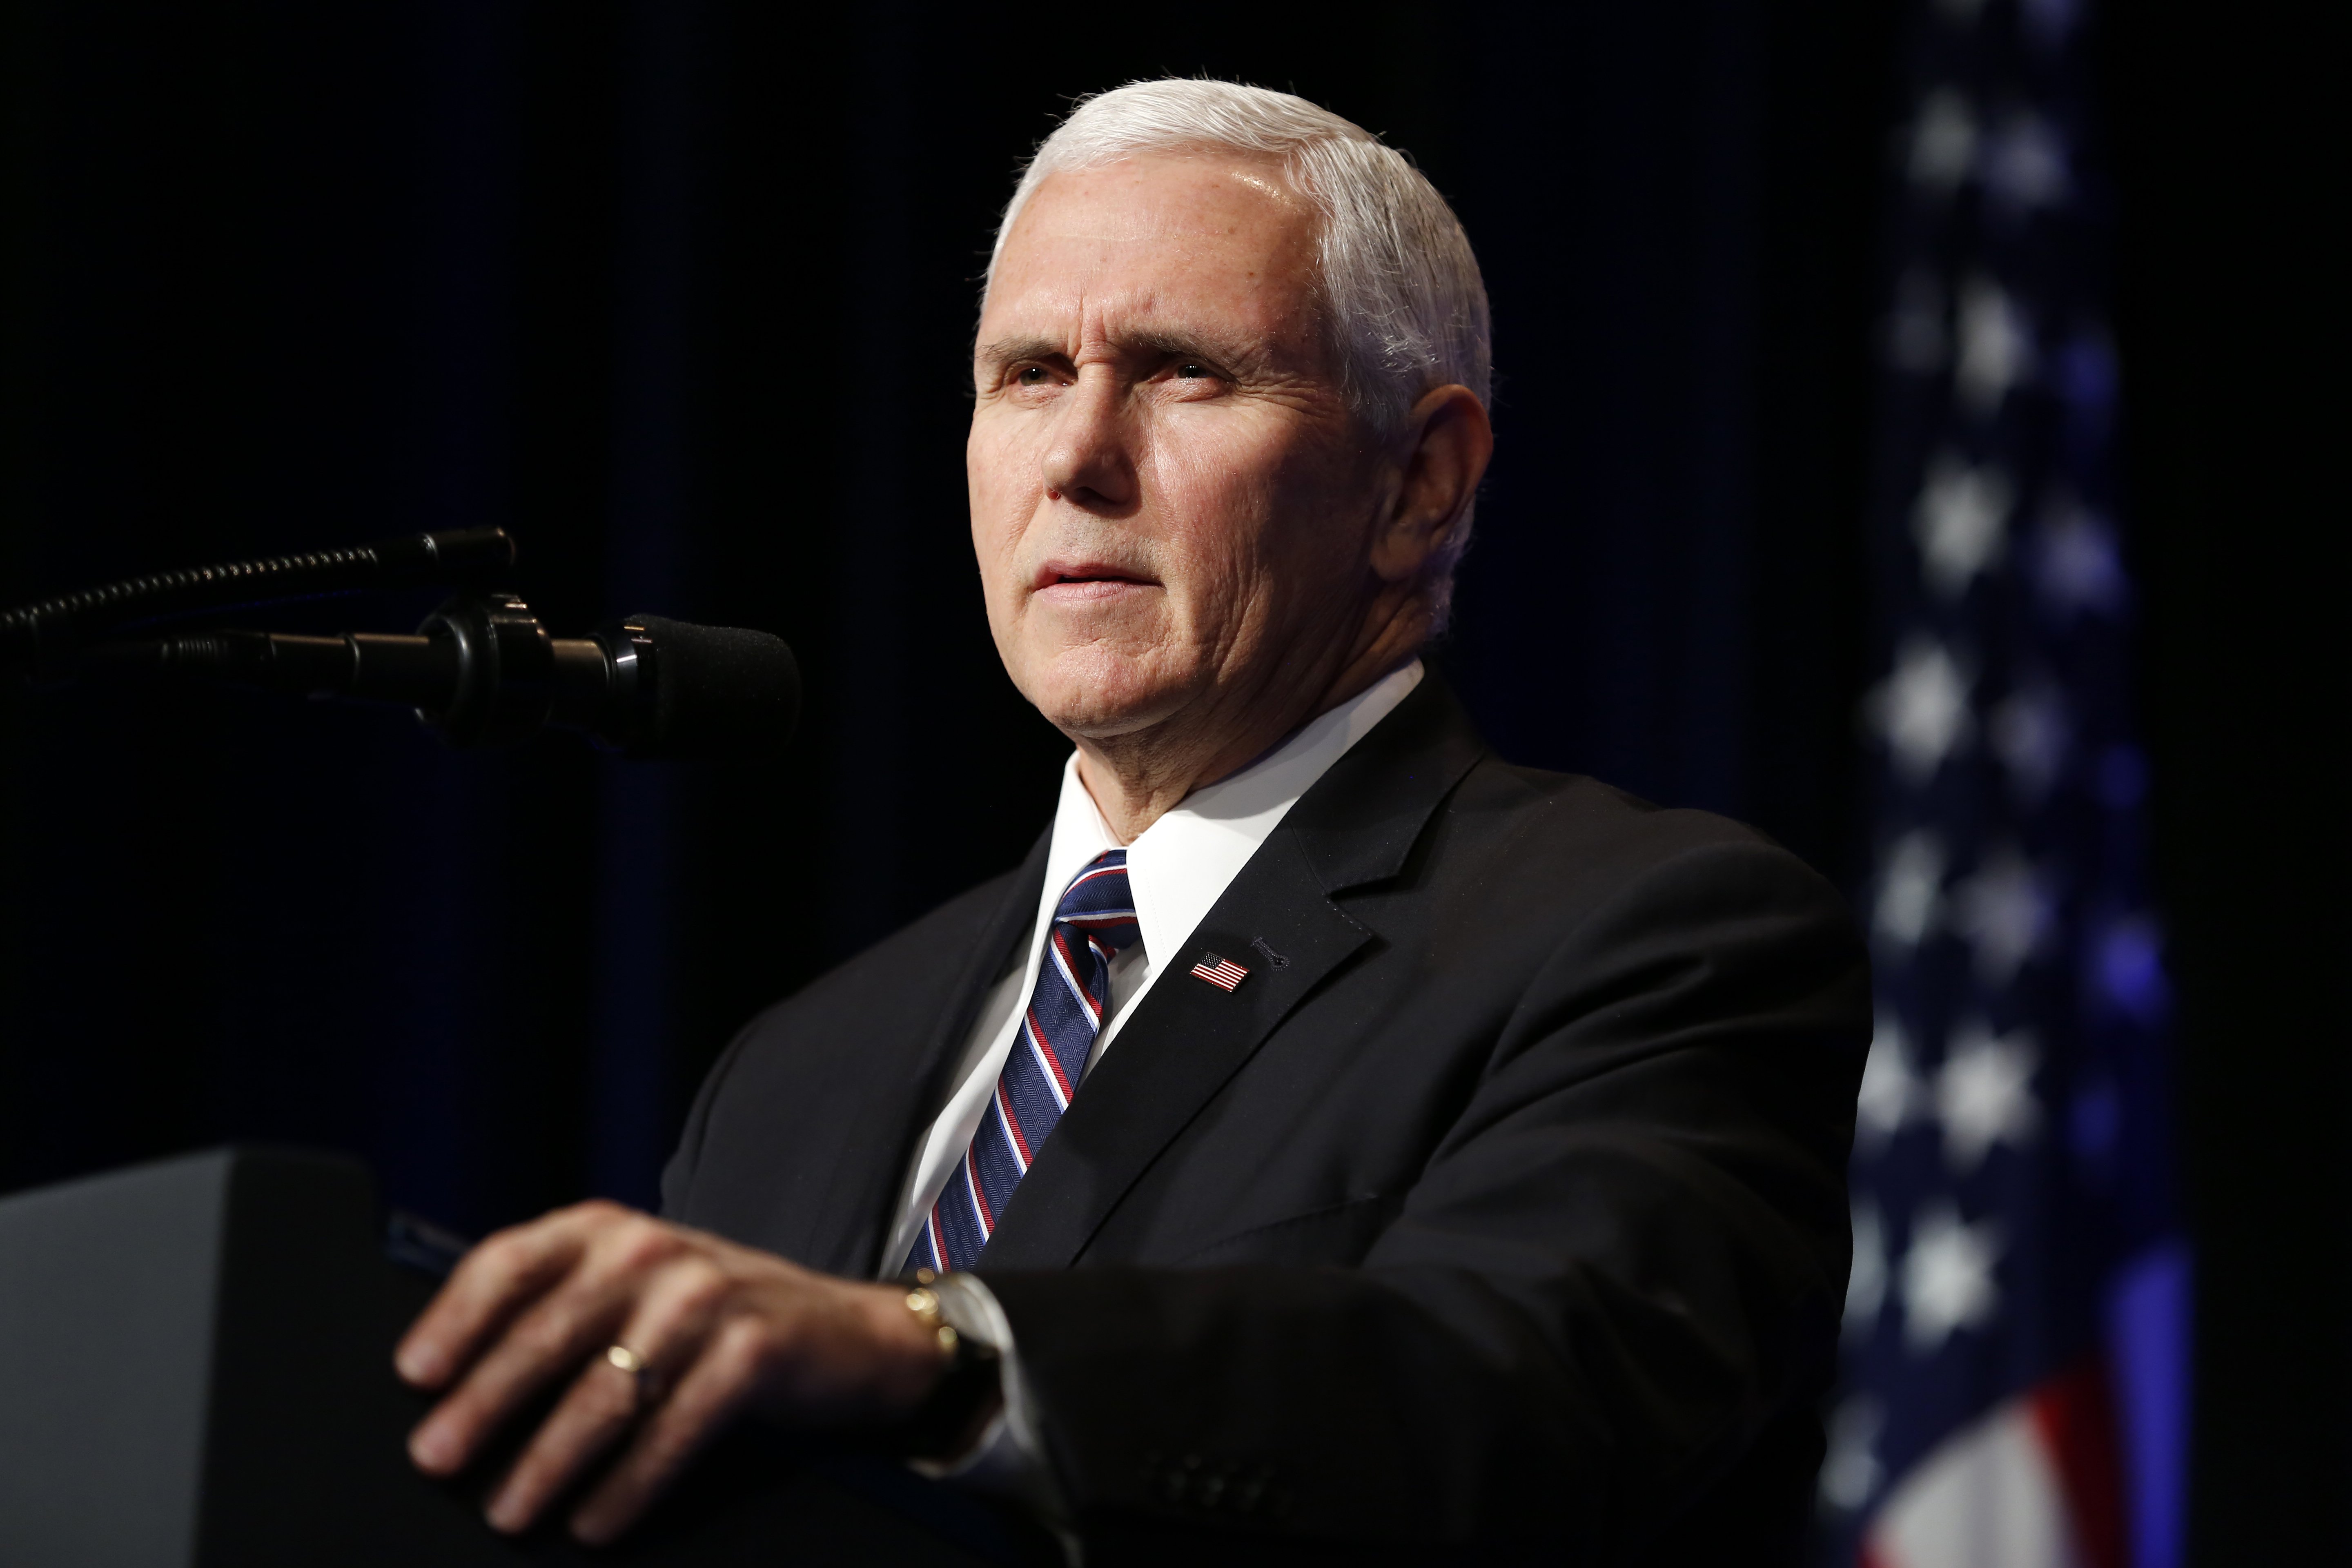  Vice President Mike Pence speaks during a Missile Defense Review announcement on January 17, 2019 at the Pentagon, in Arlington, Virginia | Photo: GettyImages